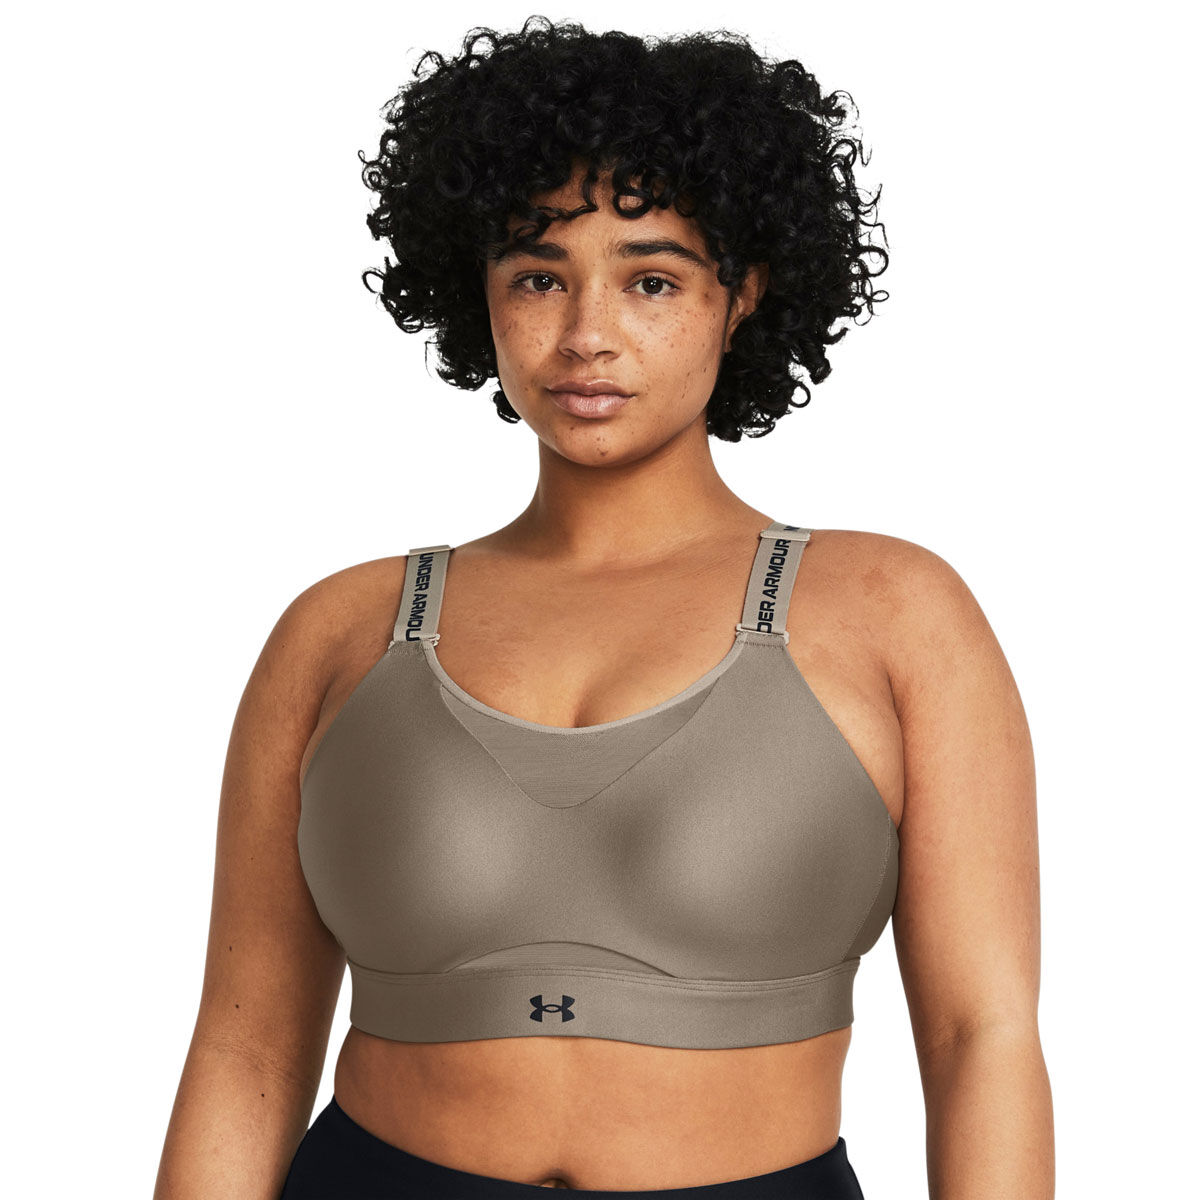 Under Armour Womens Infinity High Impact Sports Bra, Taupe, rebel_hi-res